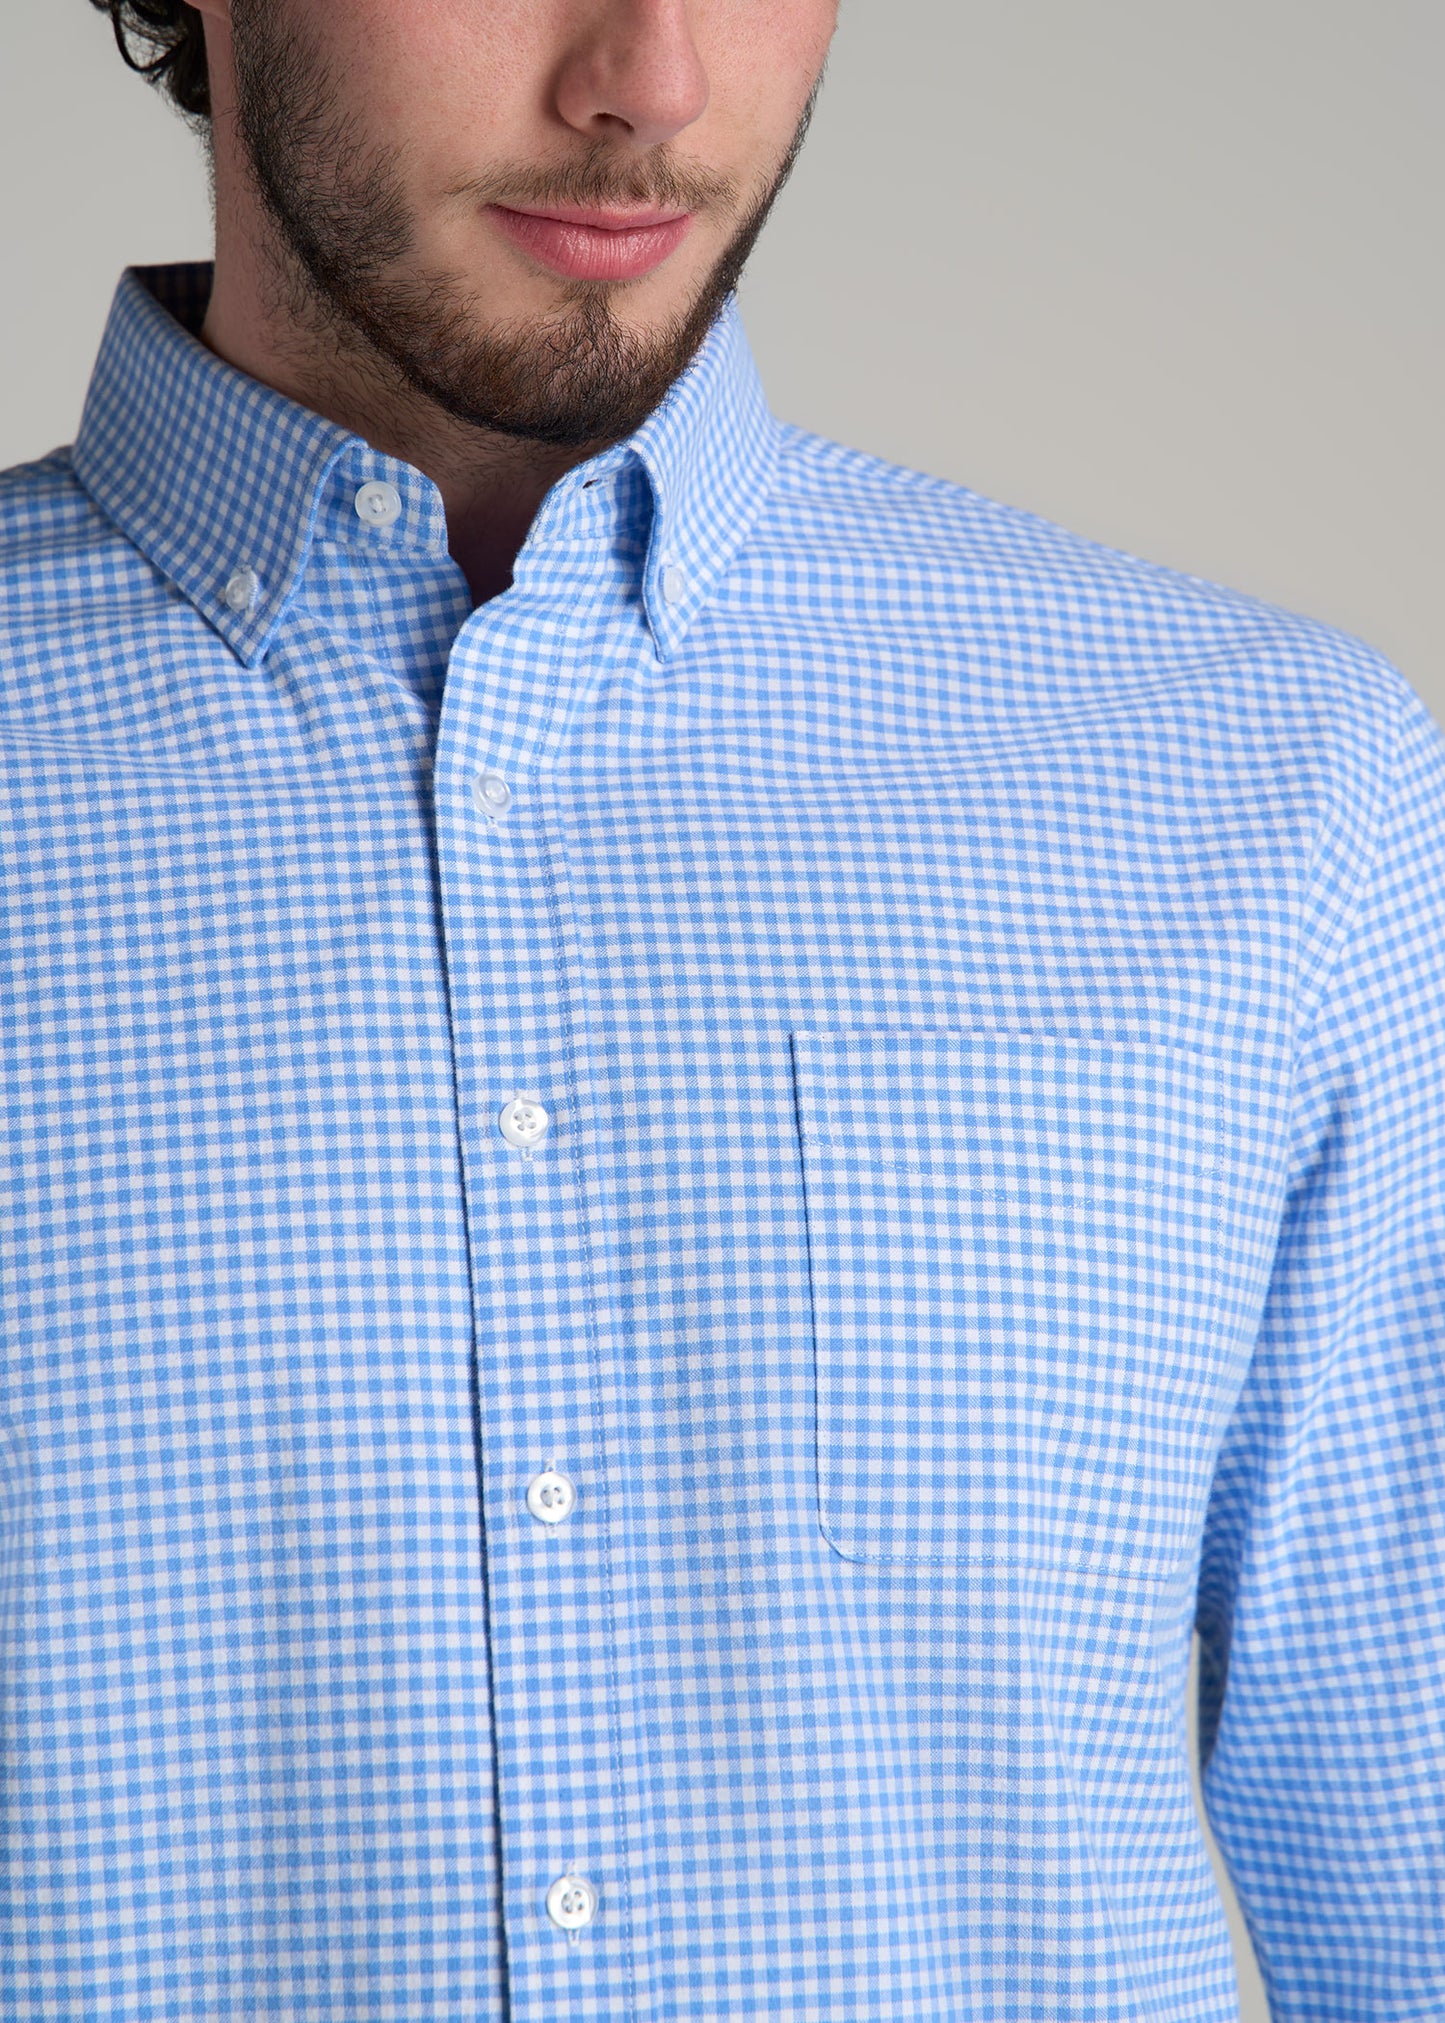 Washed Oxford Shirt for Tall Men in Light Blue Gingham